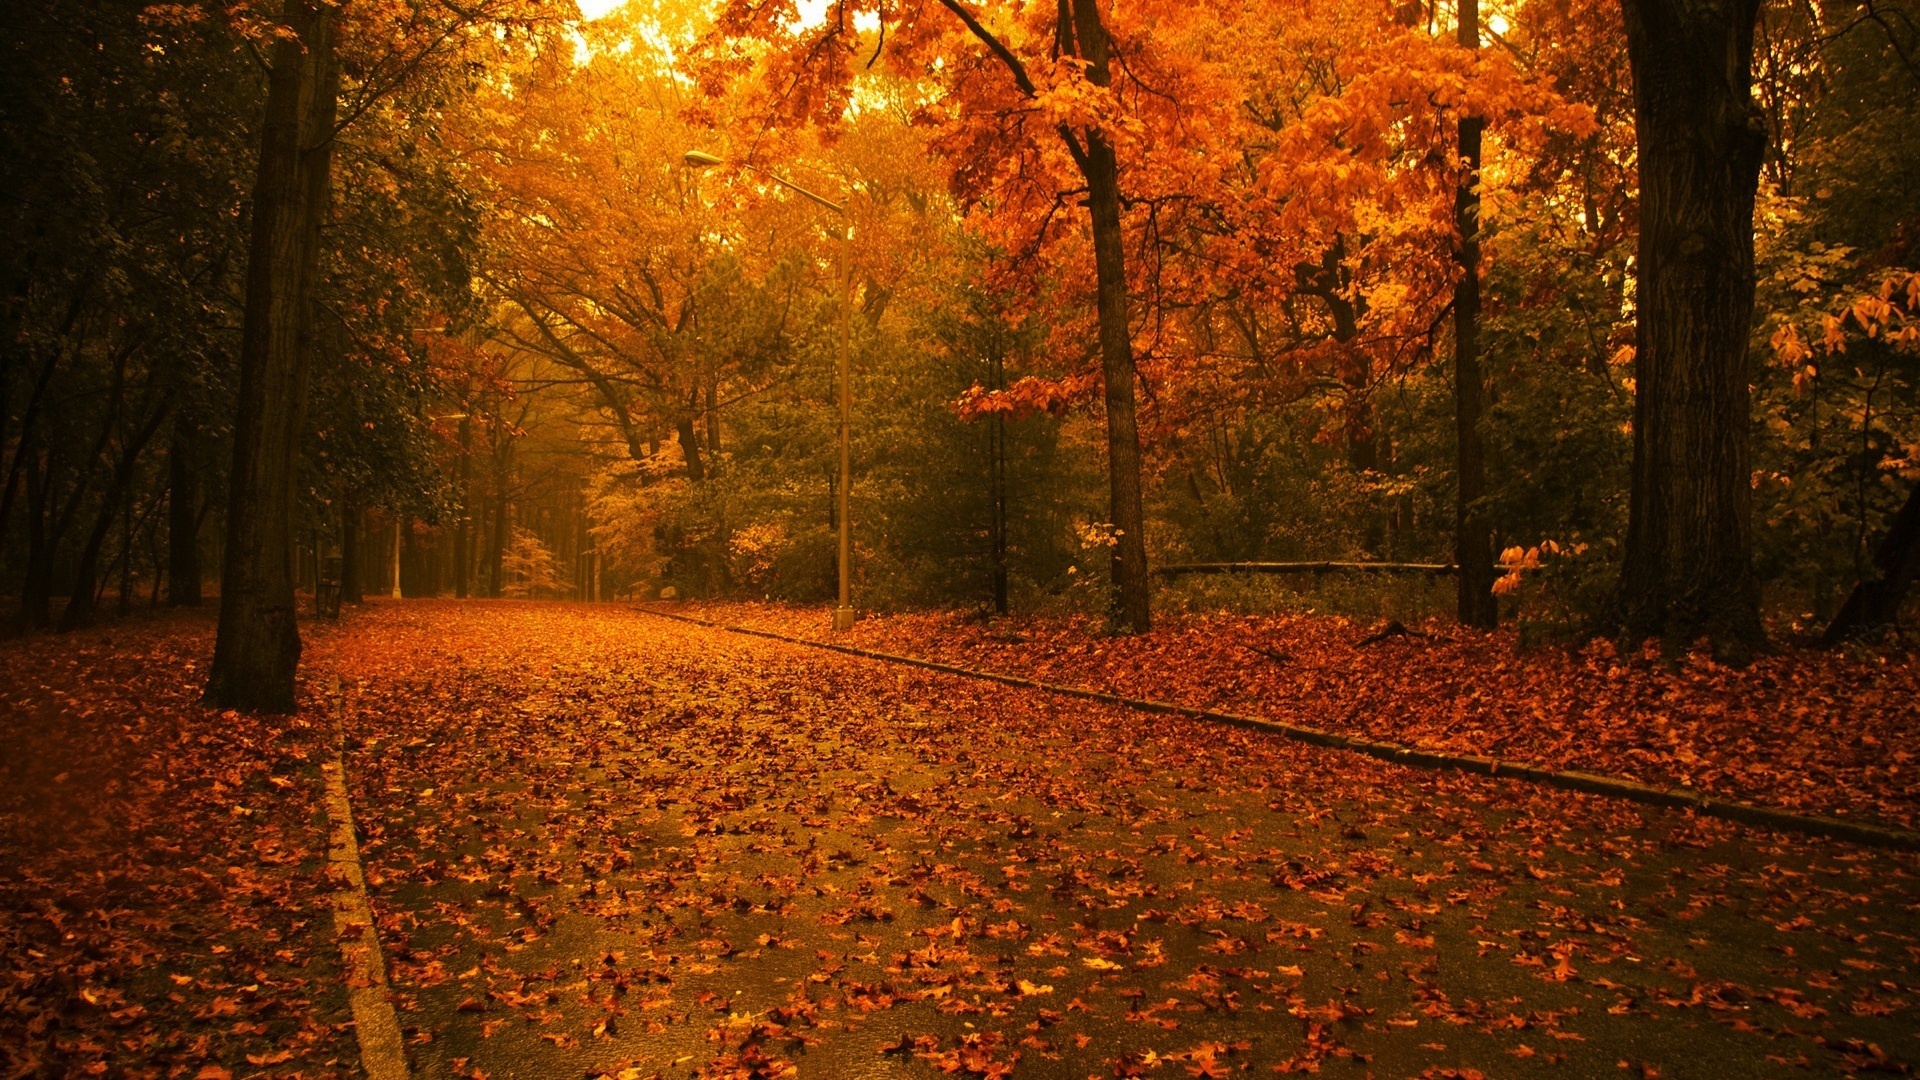 Scenery Pics images Trees in autumn HD wallpaper and background ...